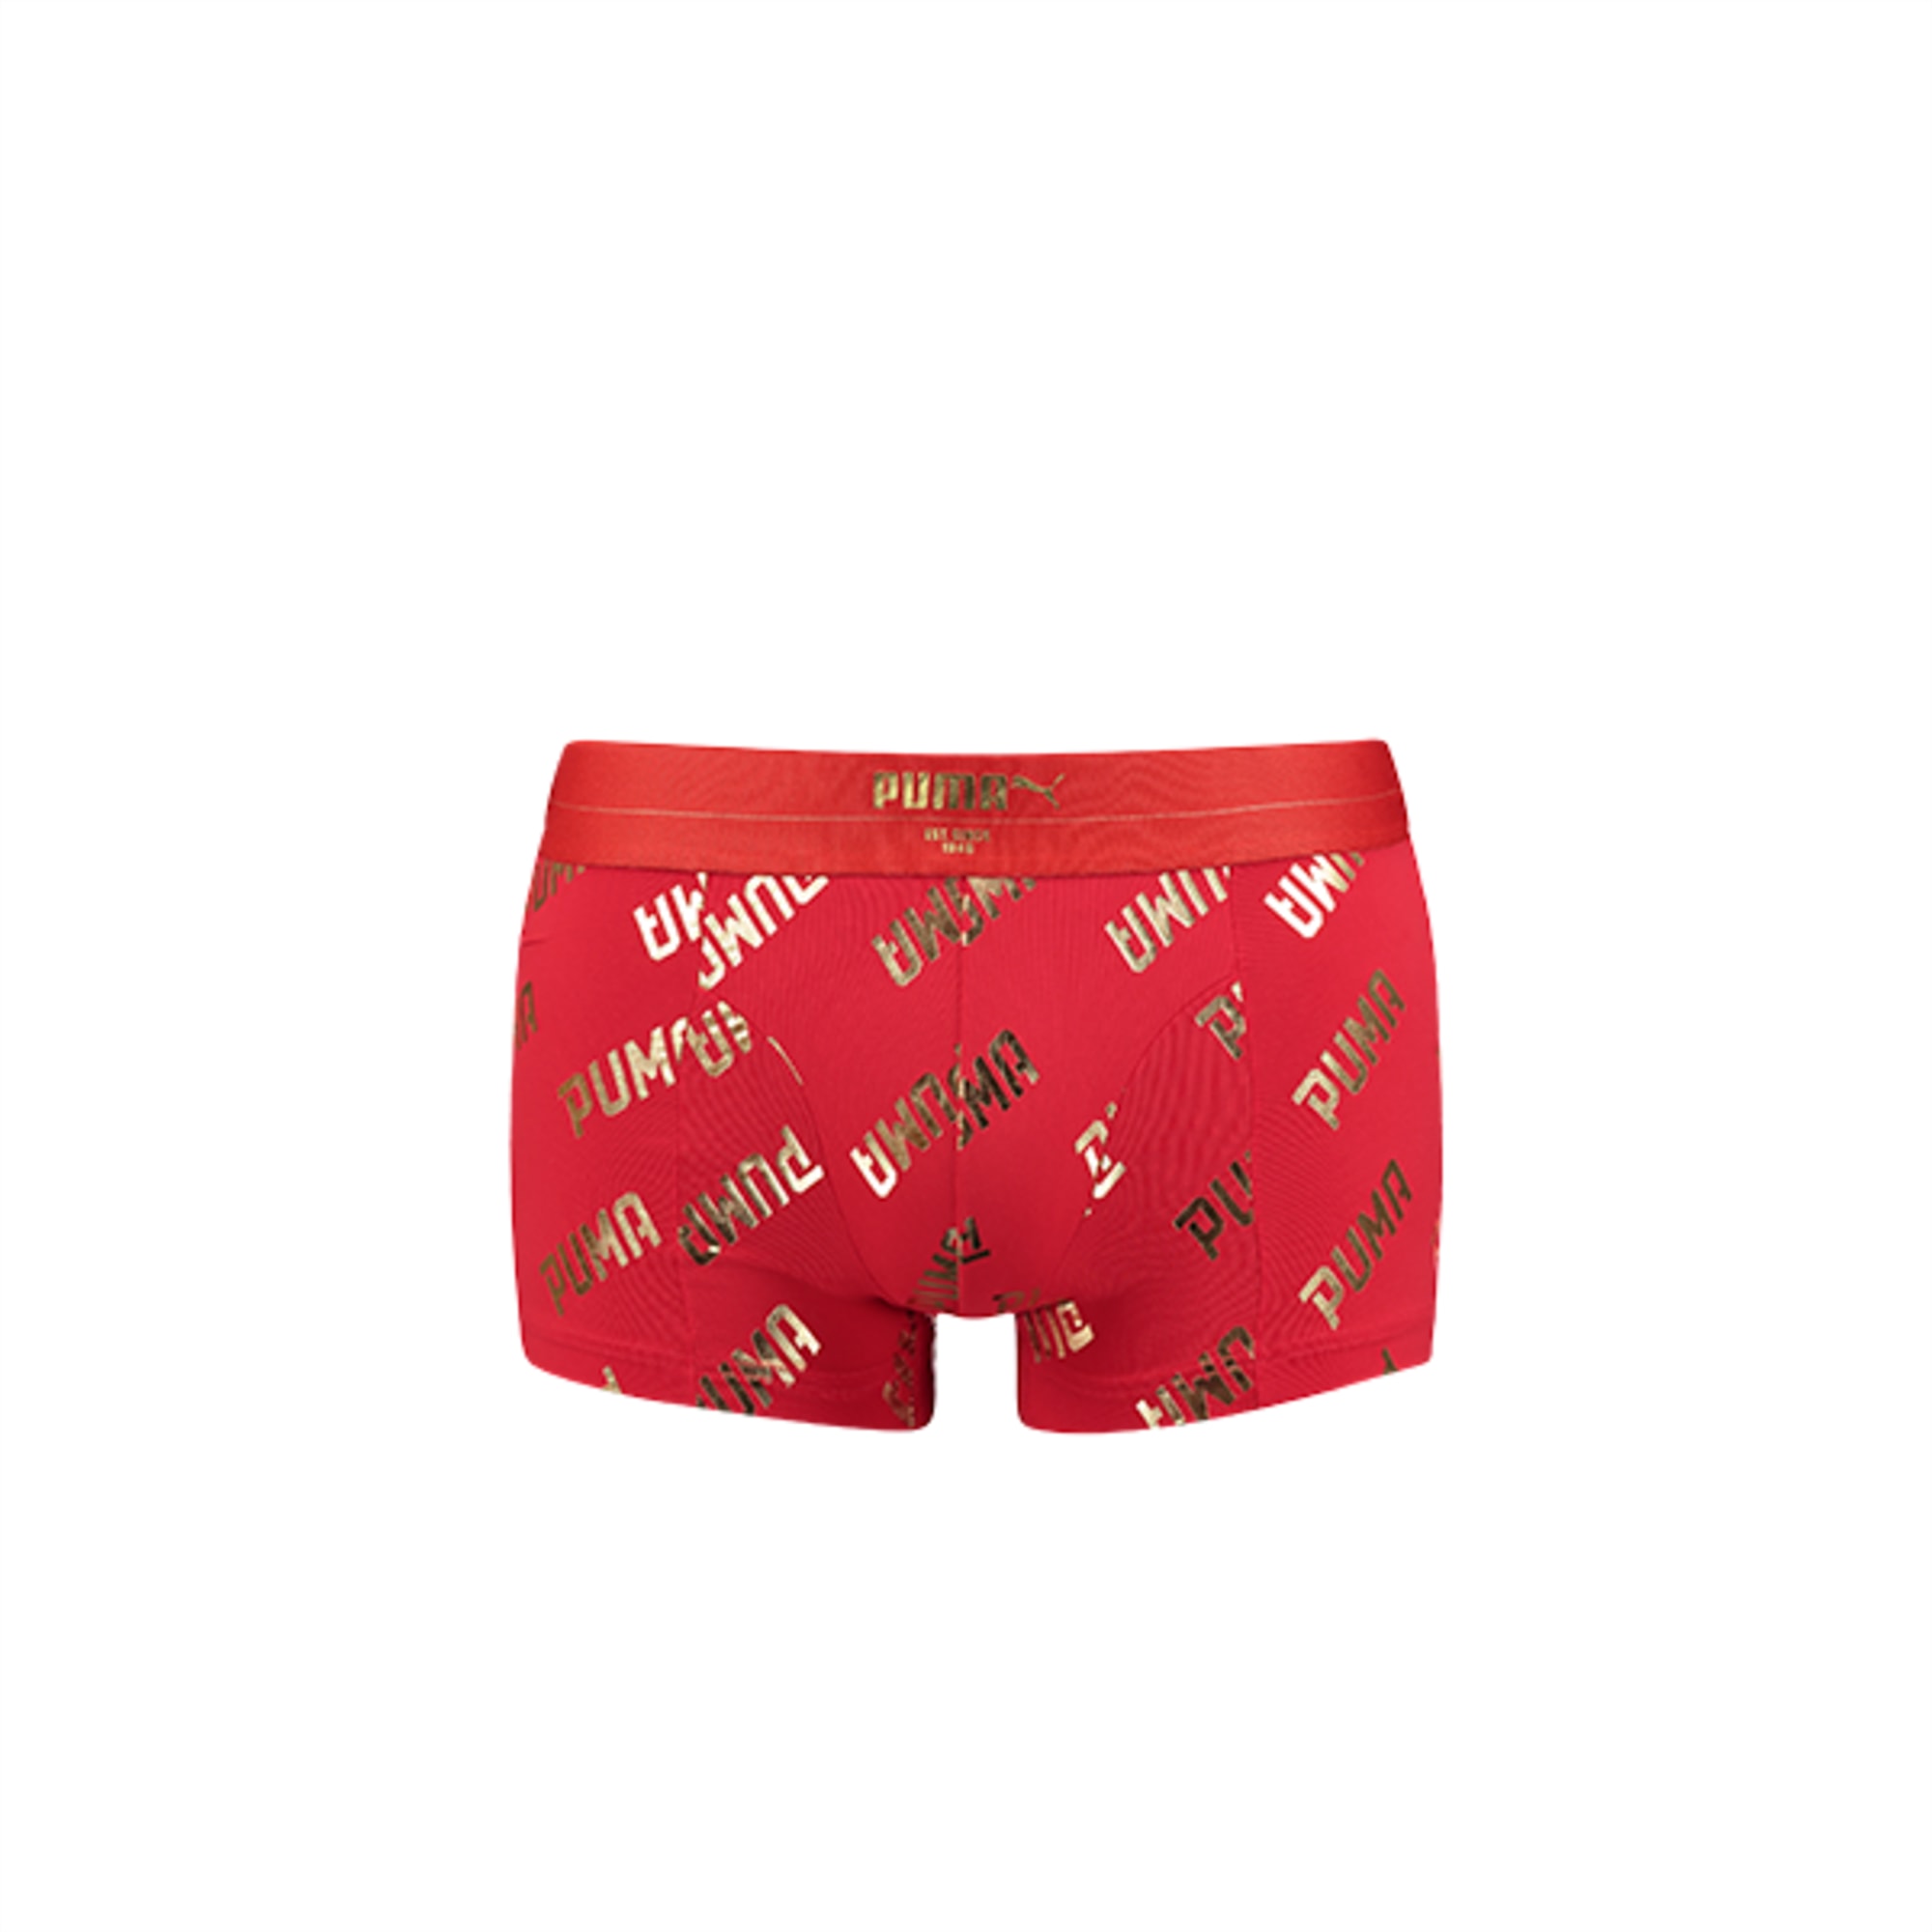 Men's Lifestyle Trunk 1 Pack, Red/Gold, large-SEA